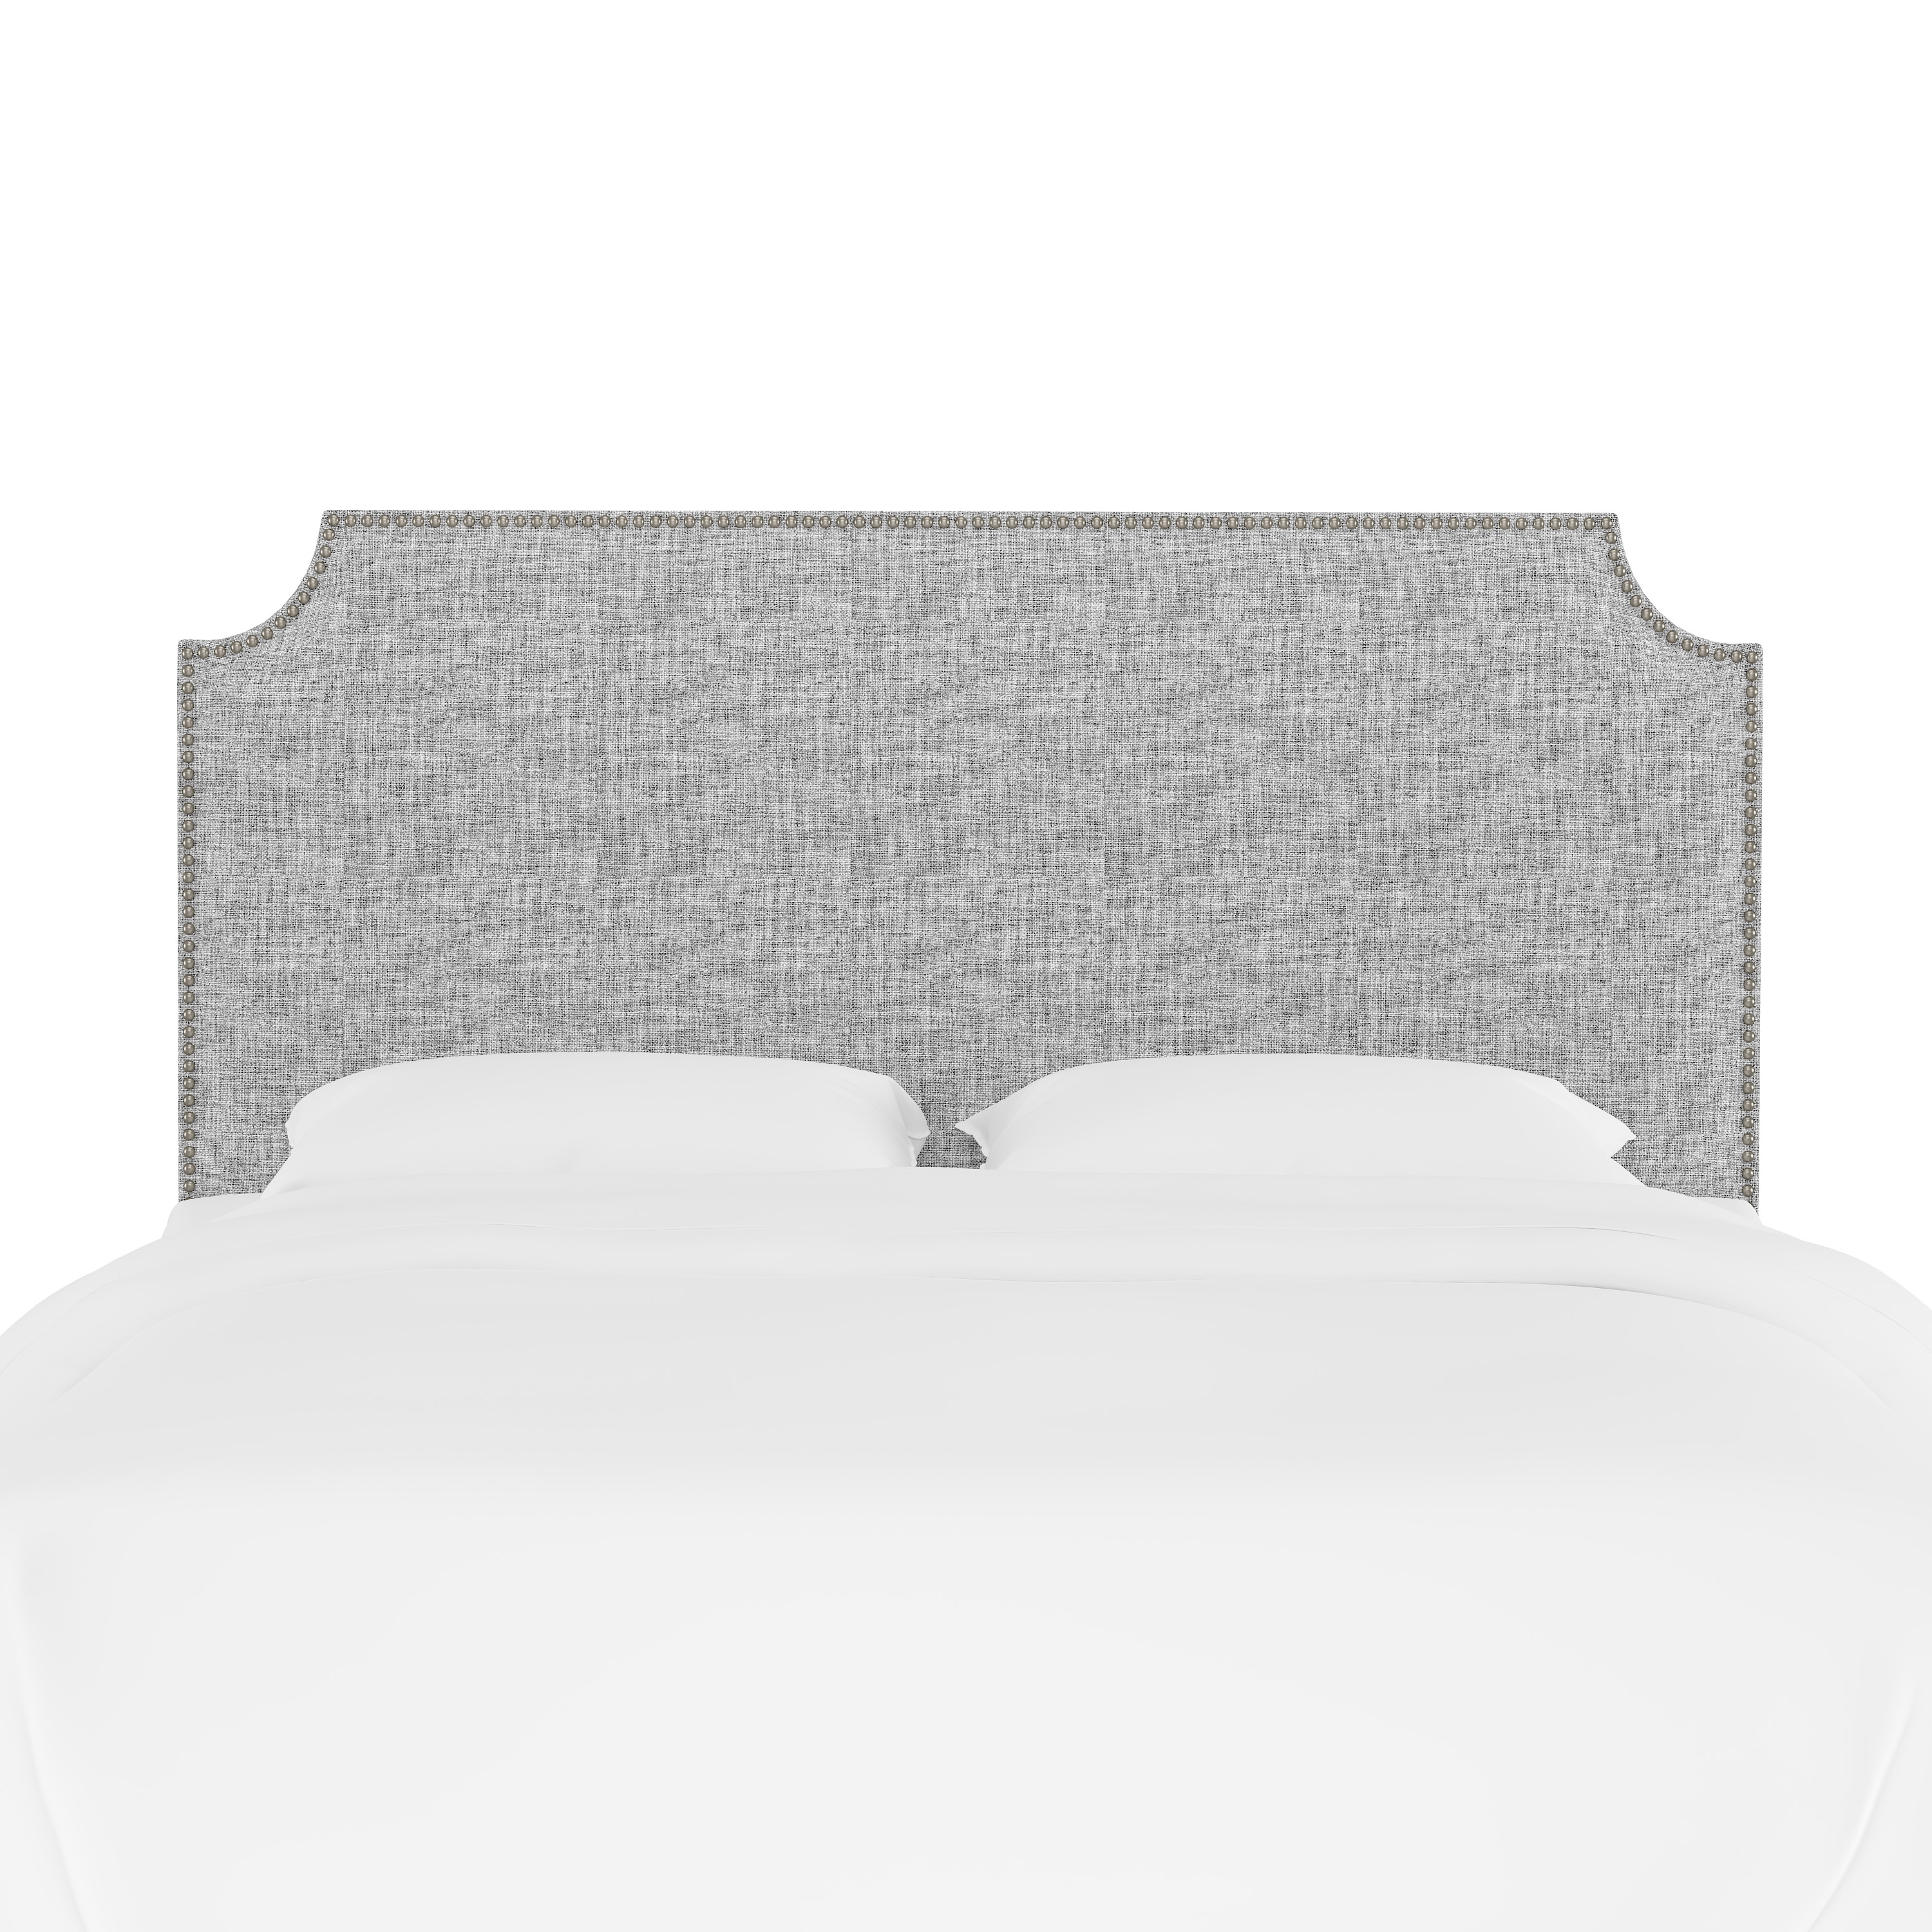 Queen Madison Headboard, Pewter Nailheads - Image 1